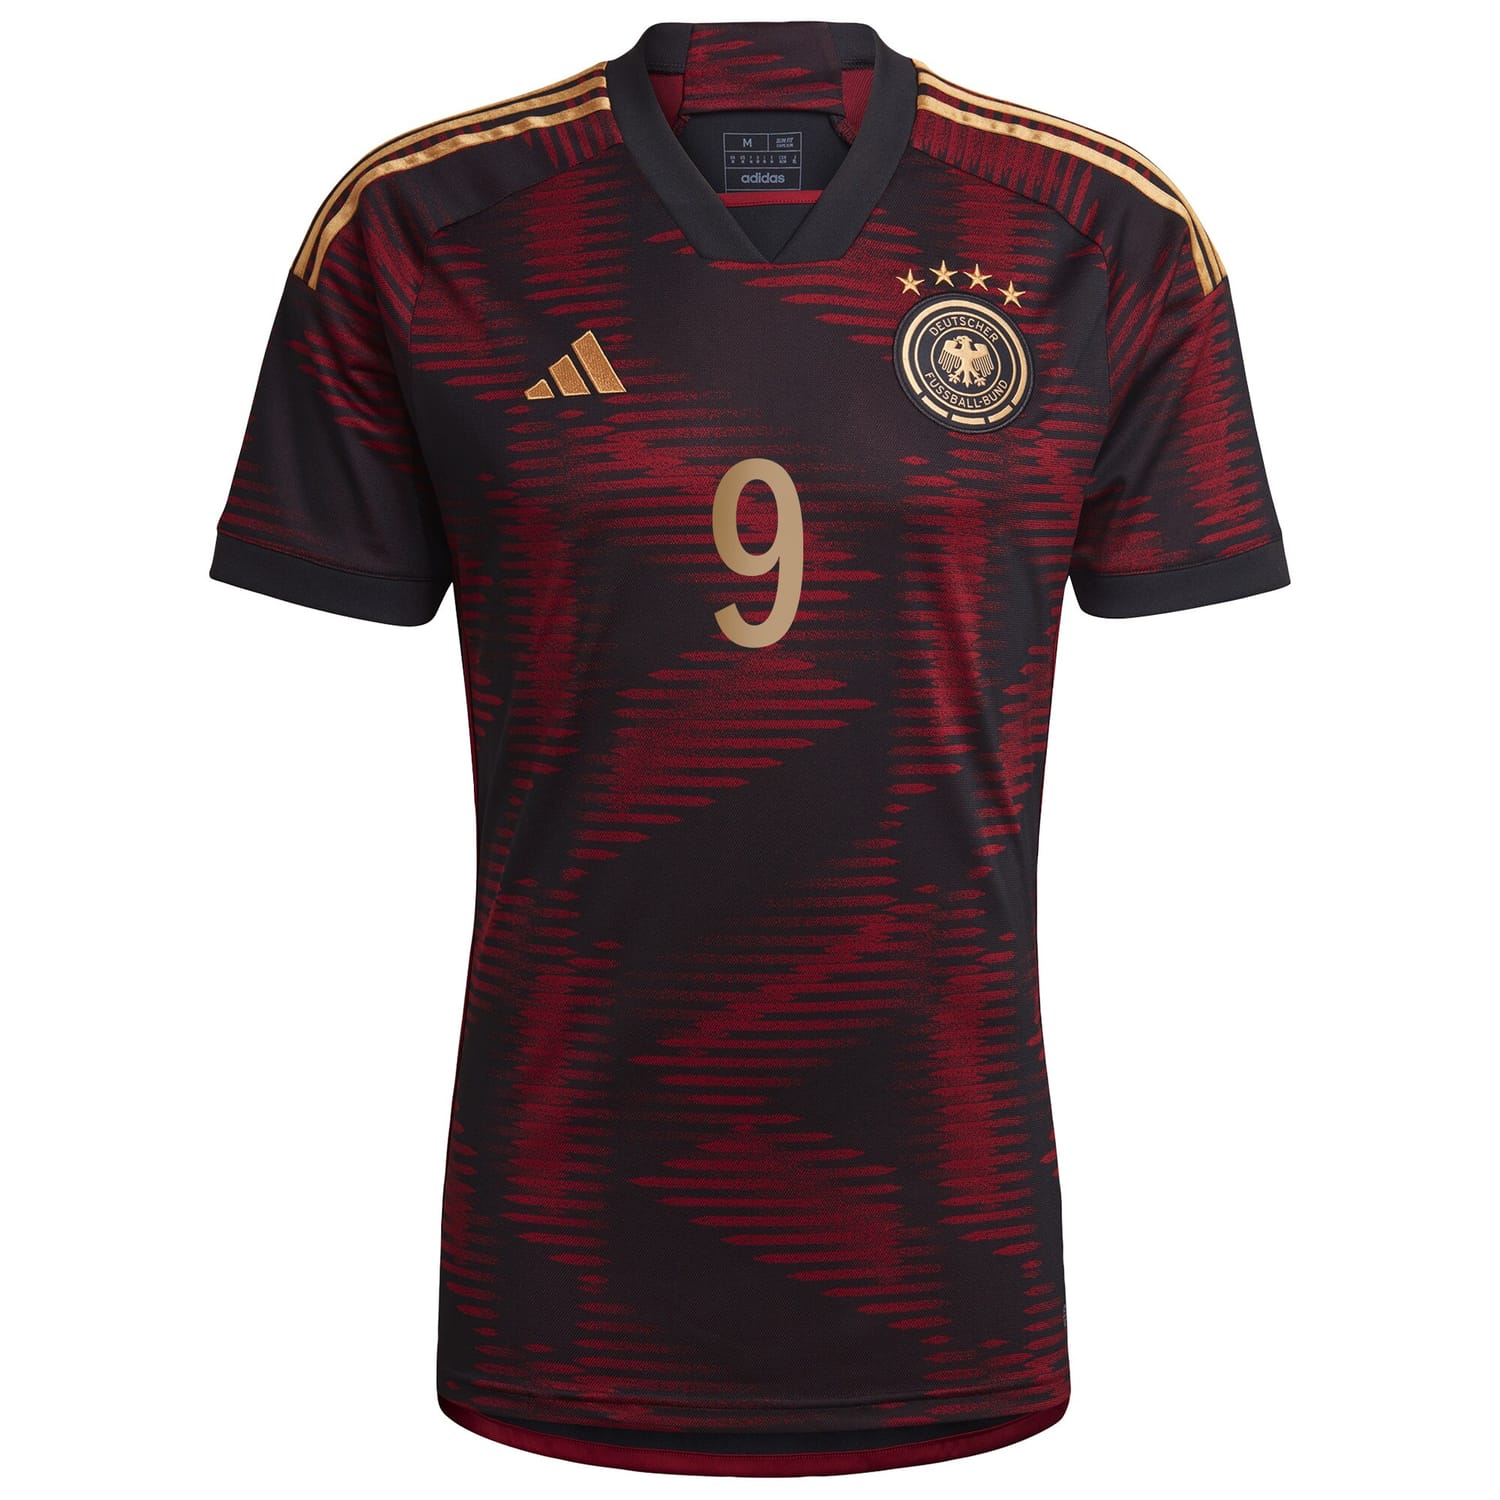 Germany National Team Away Jersey Shirt Black 2022-23 player Timo Werner printing for Men